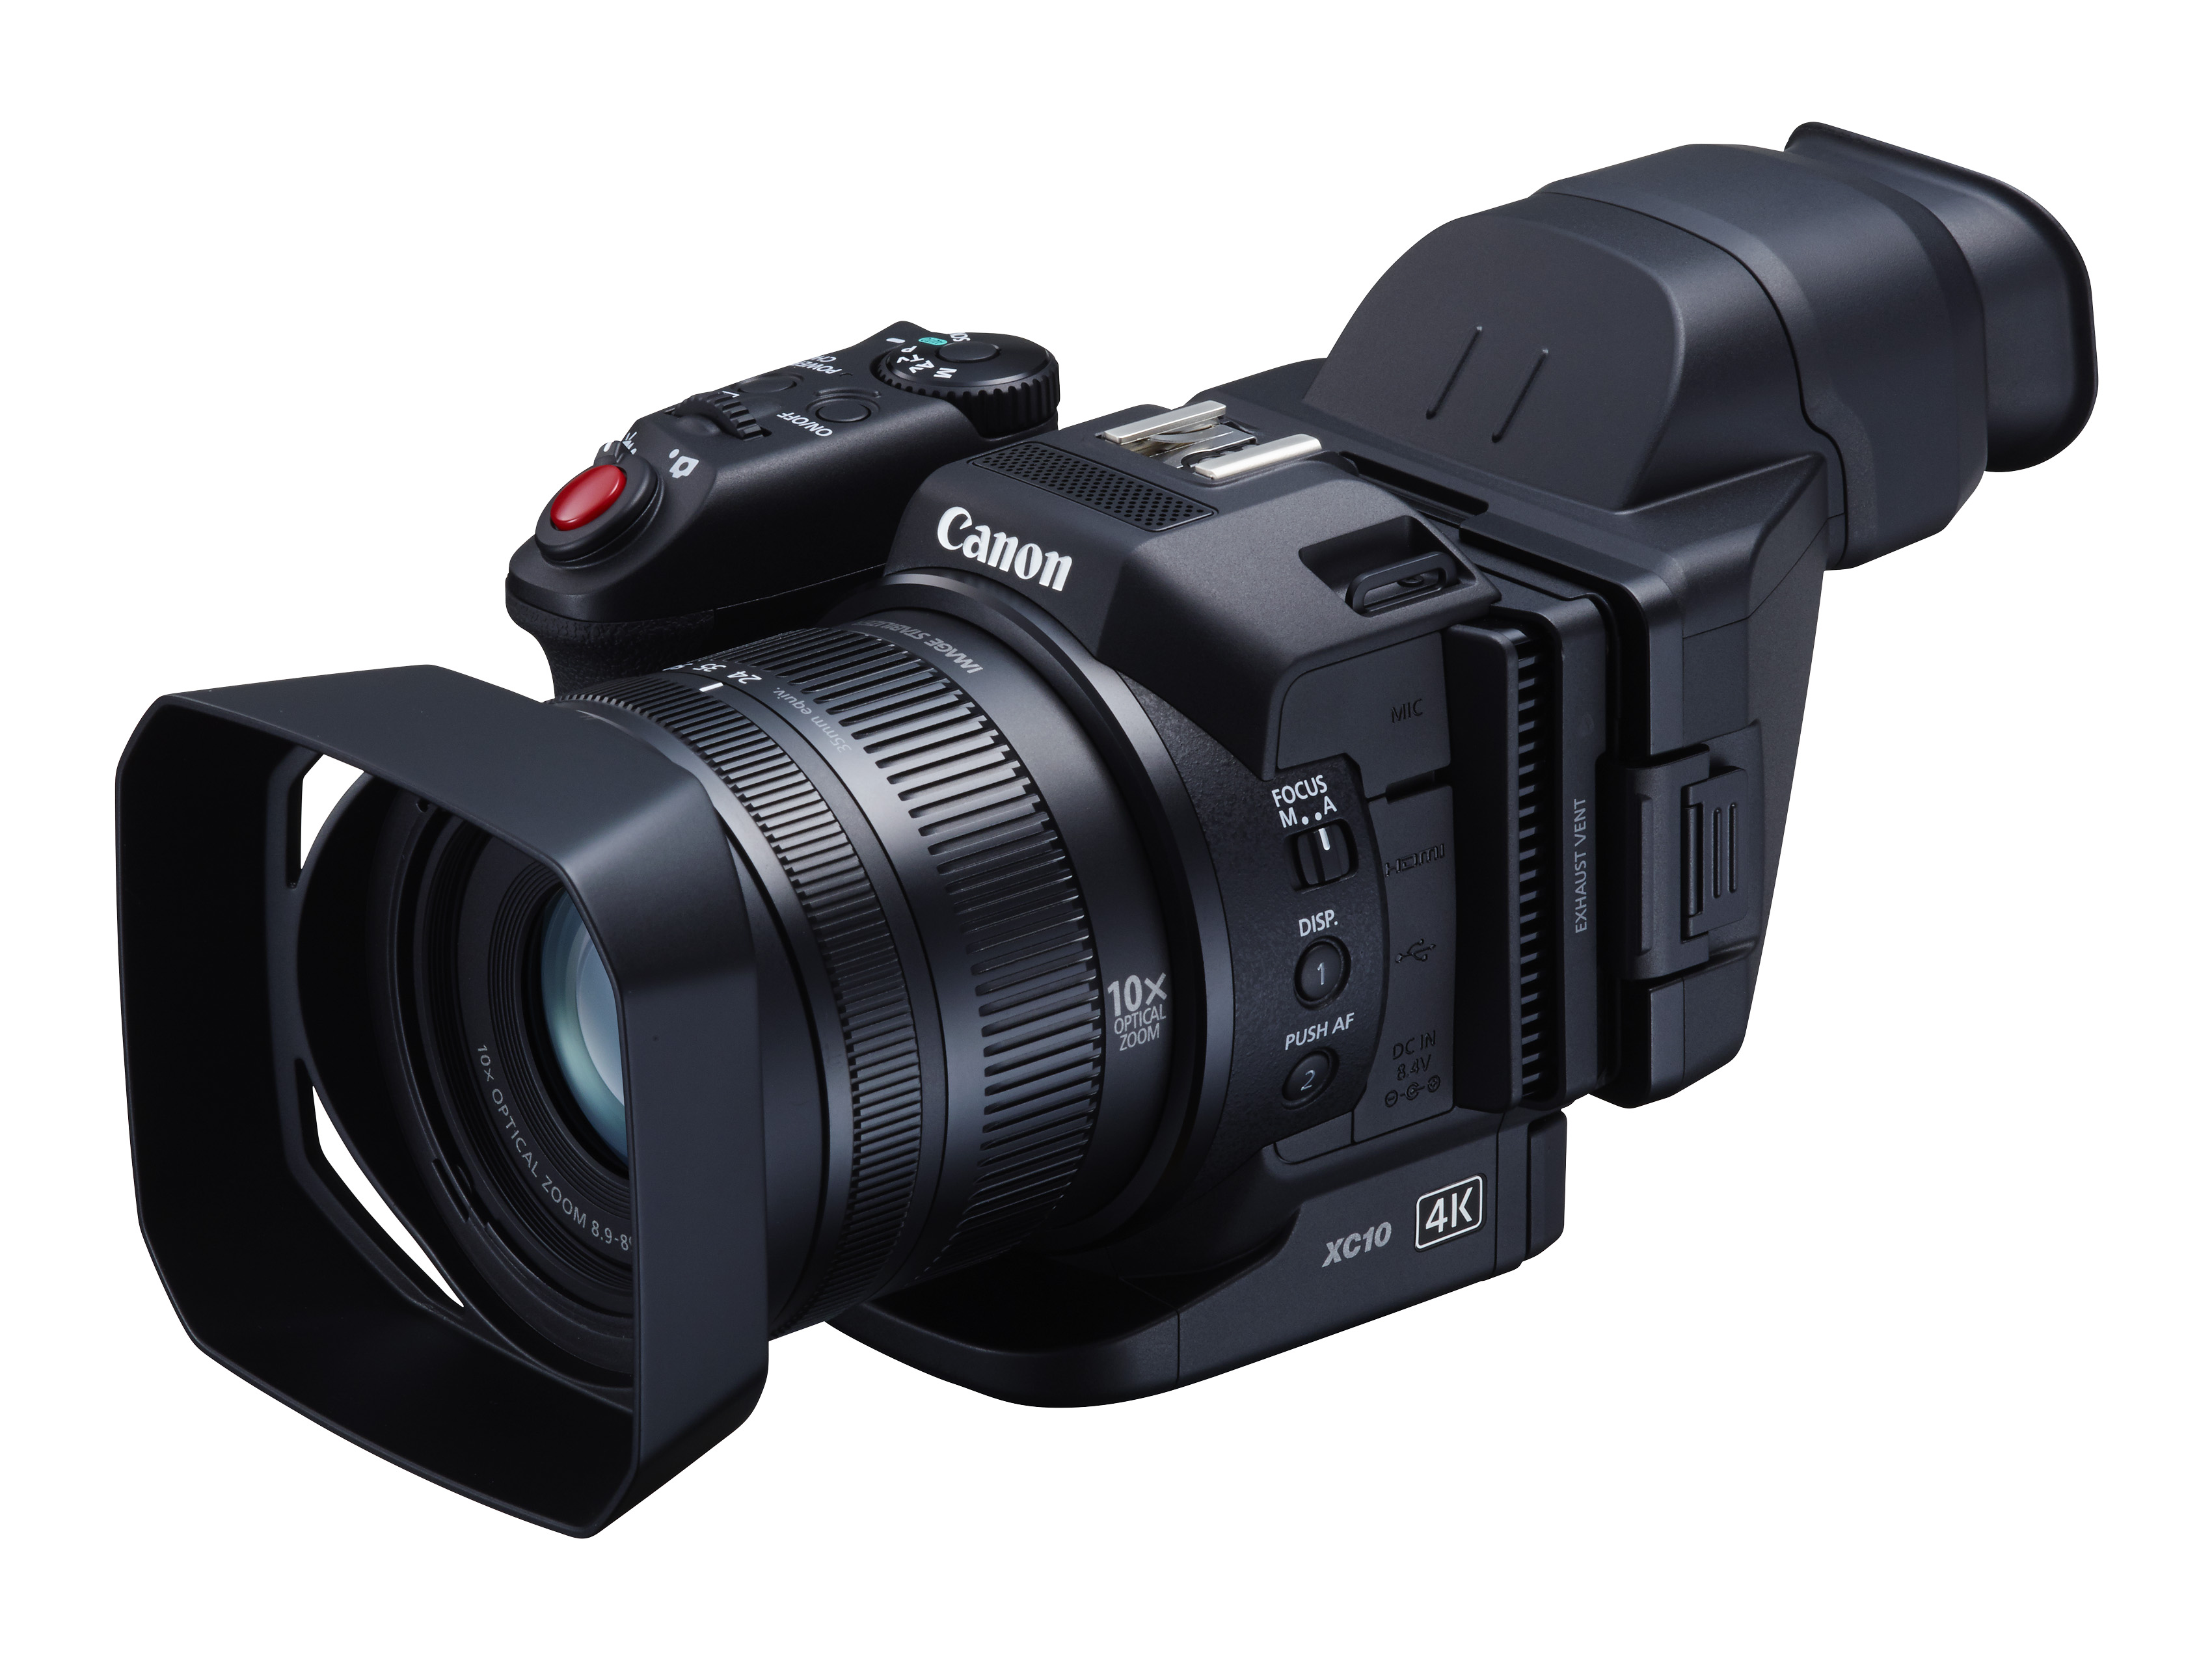 The Canon XC10 is a Price-Friendly 4K/1080p60 Camcorder & 12 Megapixel Still Camera